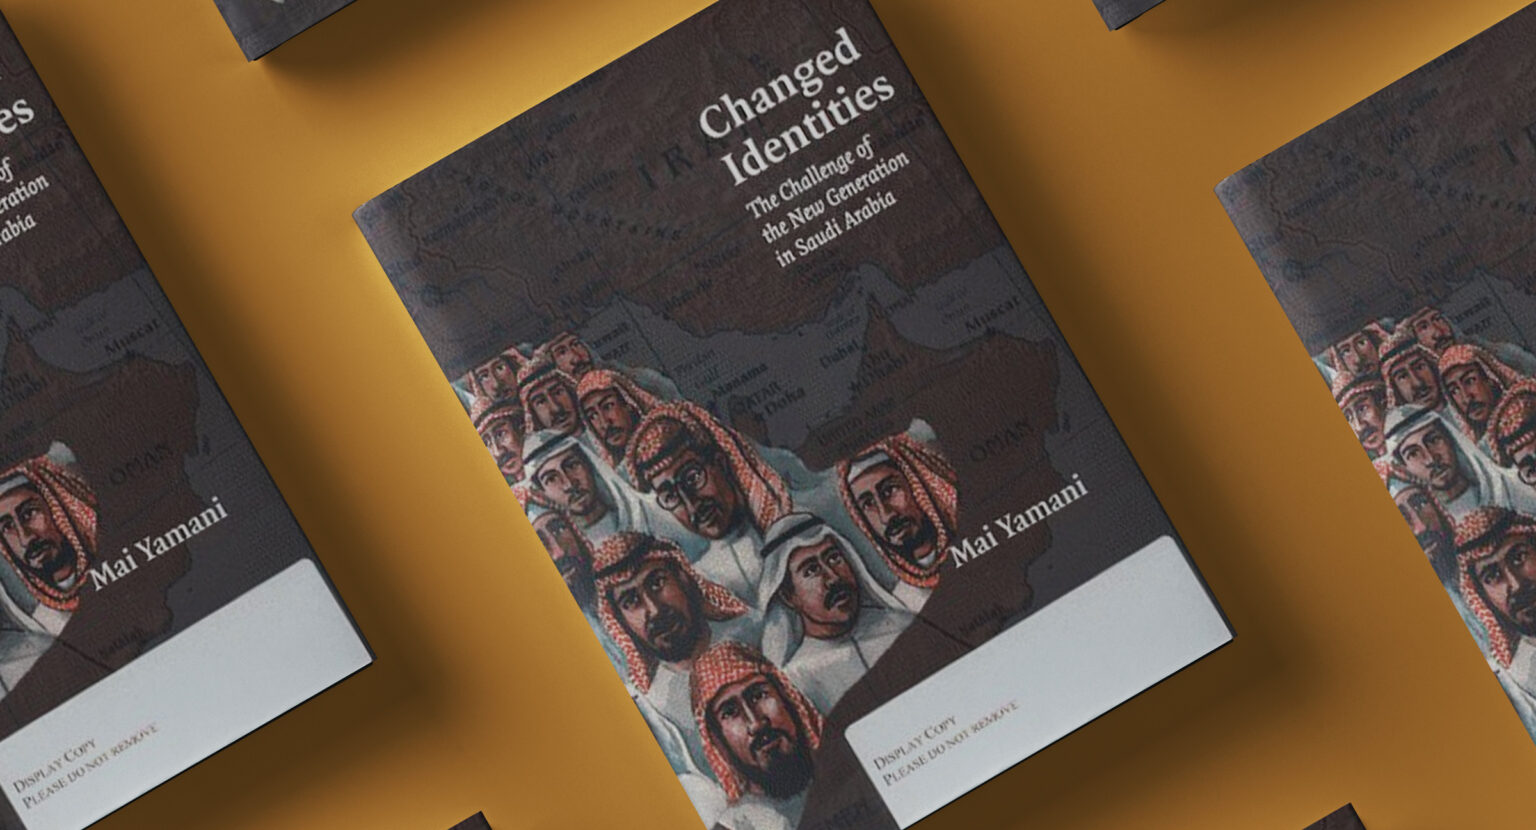 Image of several copies of Changed Identities book